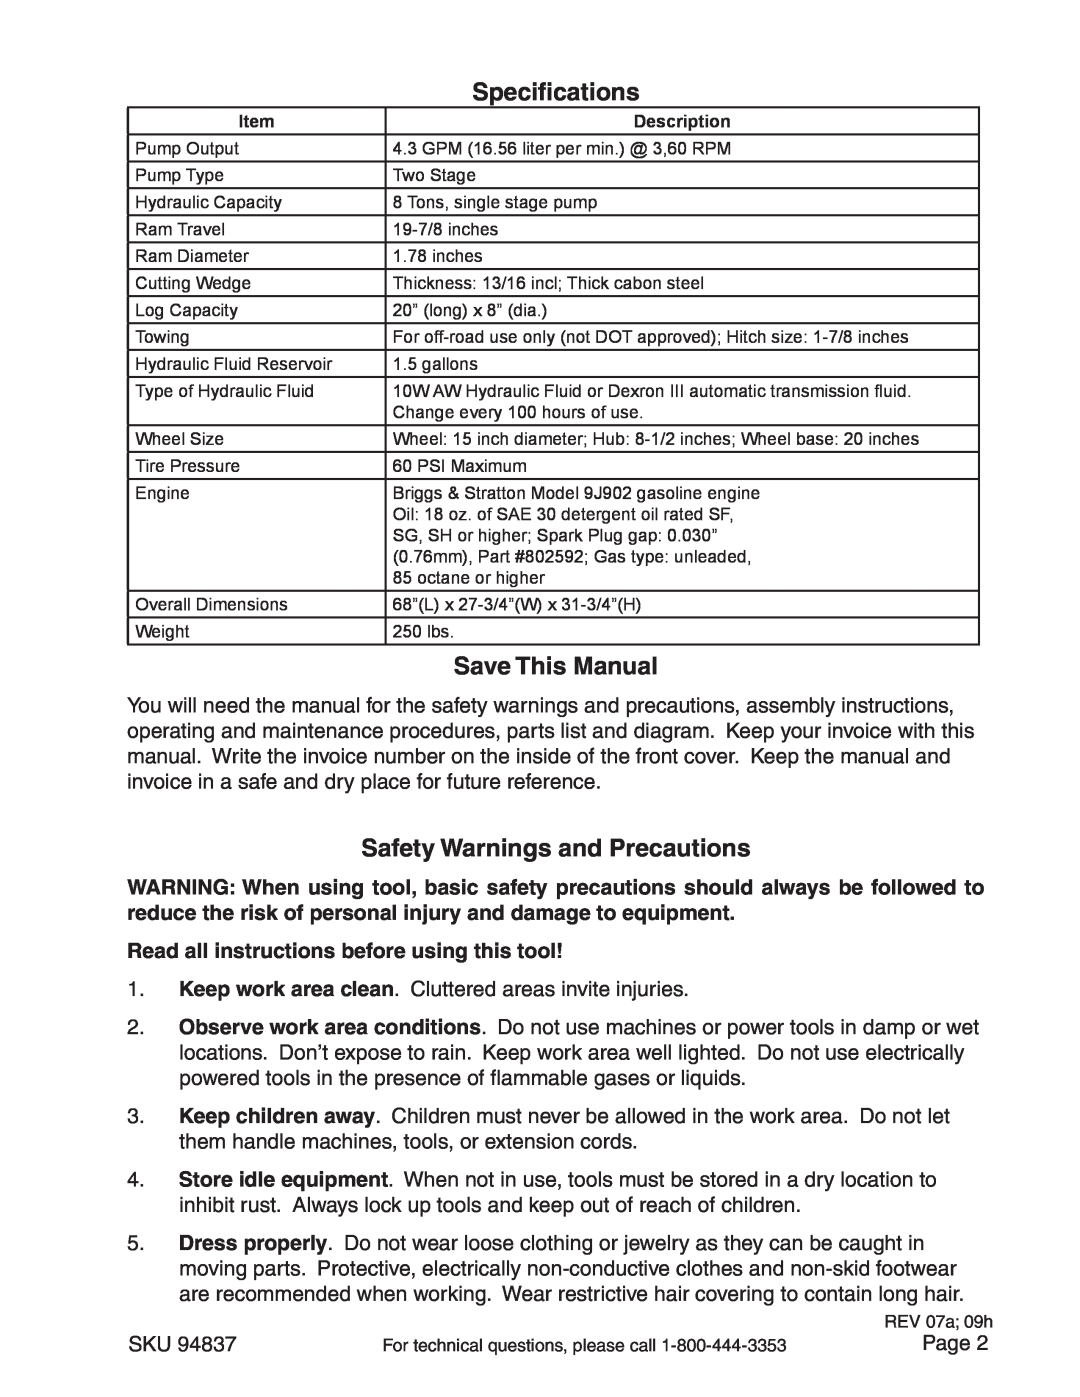 Harbor Freight Tools 94837 manual Specifications, Save This Manual, Safety Warnings and Precautions 